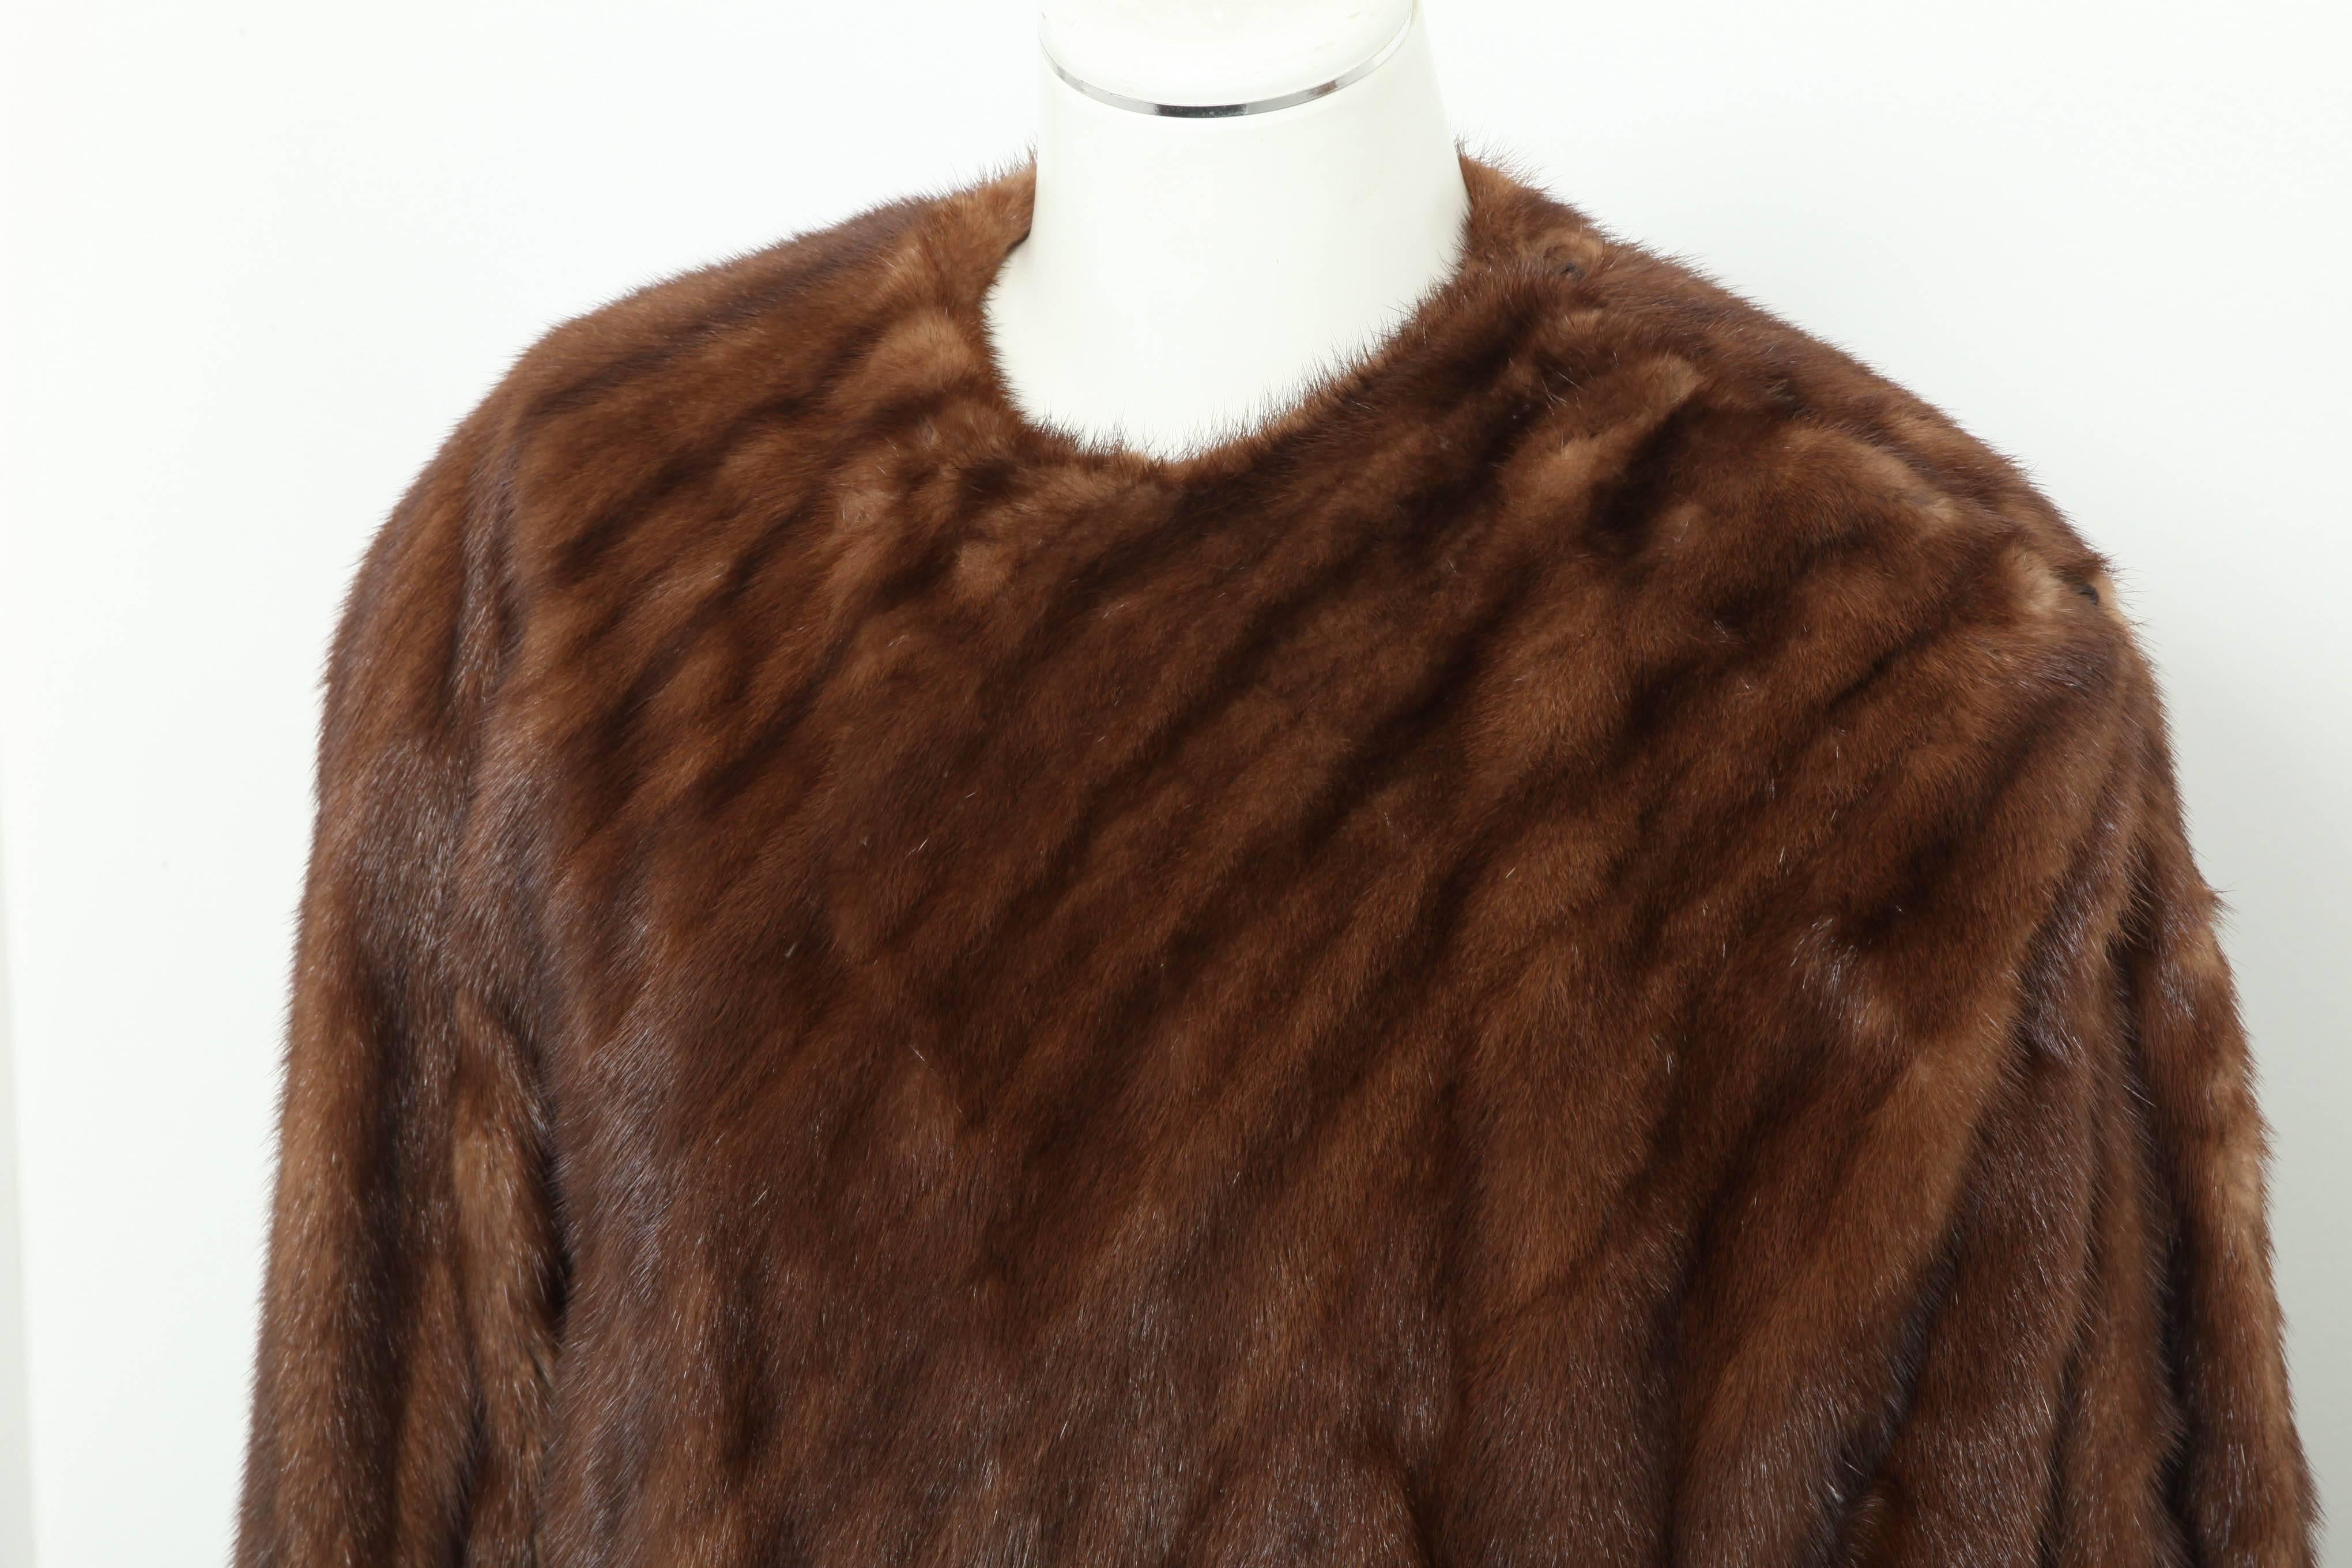 Amazing, very rare Gianni Versace mink fur coat in brown. Full-length. From 1990's but seldom worn and looks new. It has hidden hooks on one shoulder. Would fit 36-44